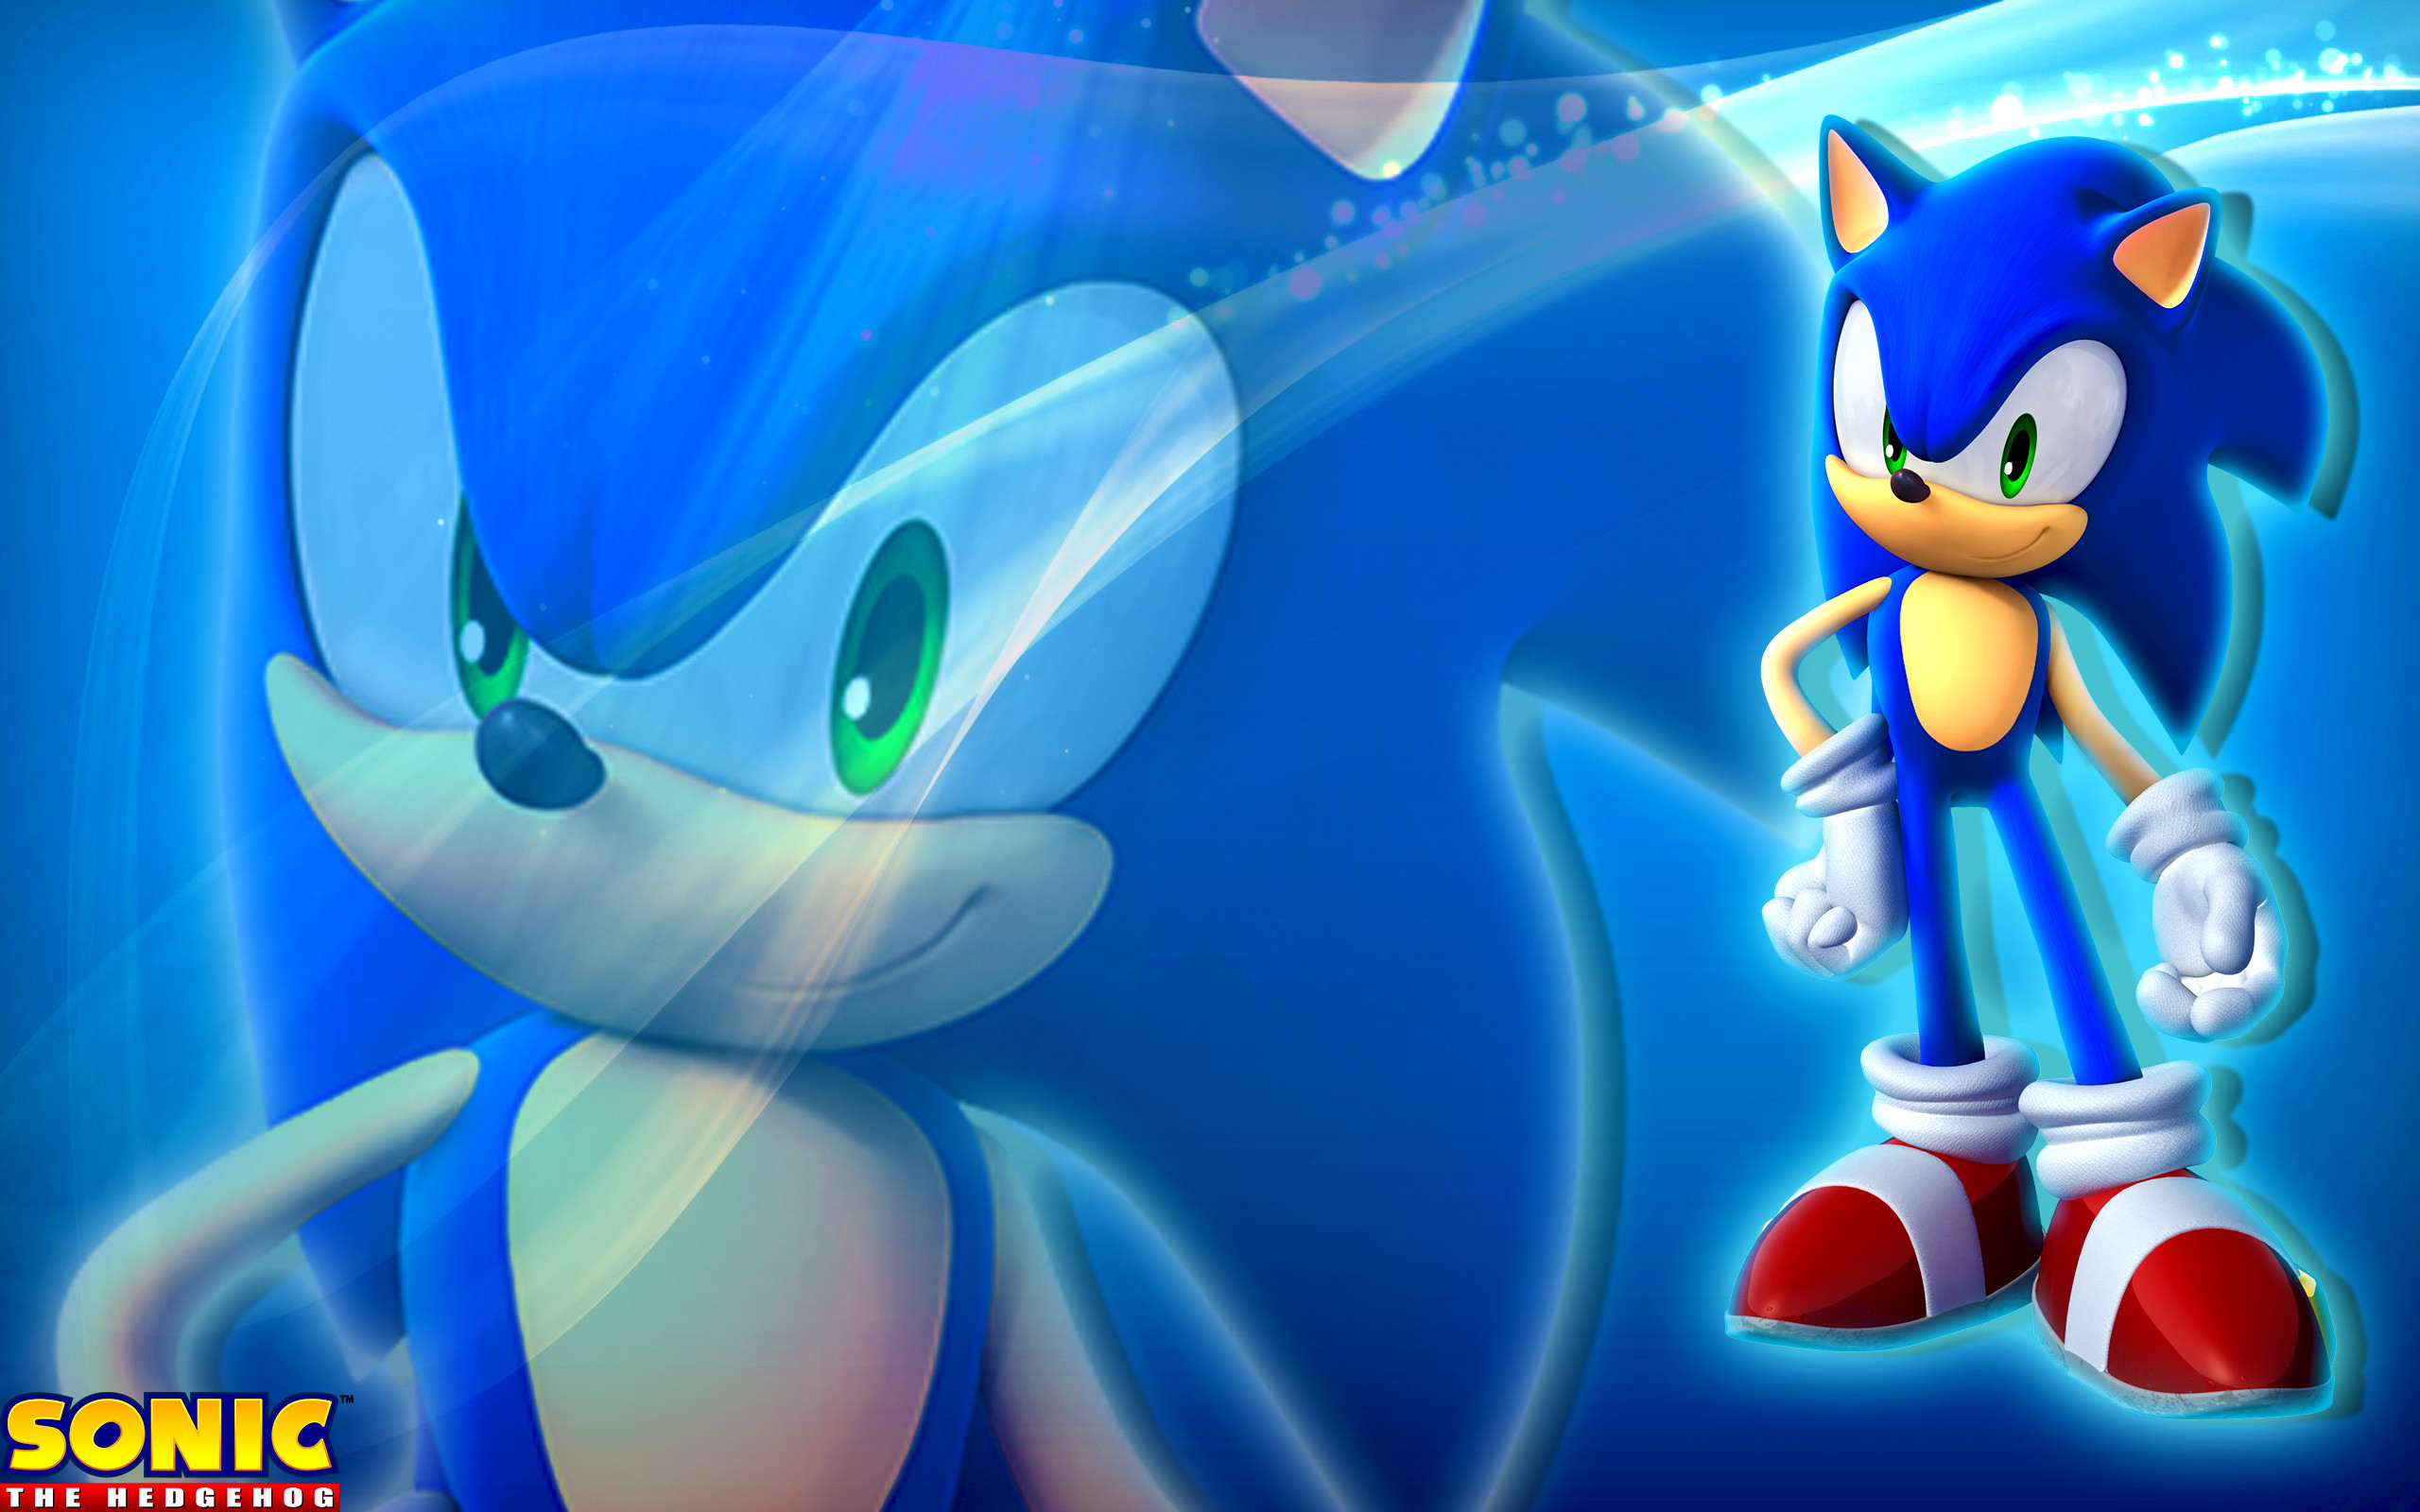 2560x1600 Sonic The Hedgehog Wallpaper by SonicTheHedgehogBG Sonic The Hedgehog  Wallpaper by SonicTheHedgehogBG